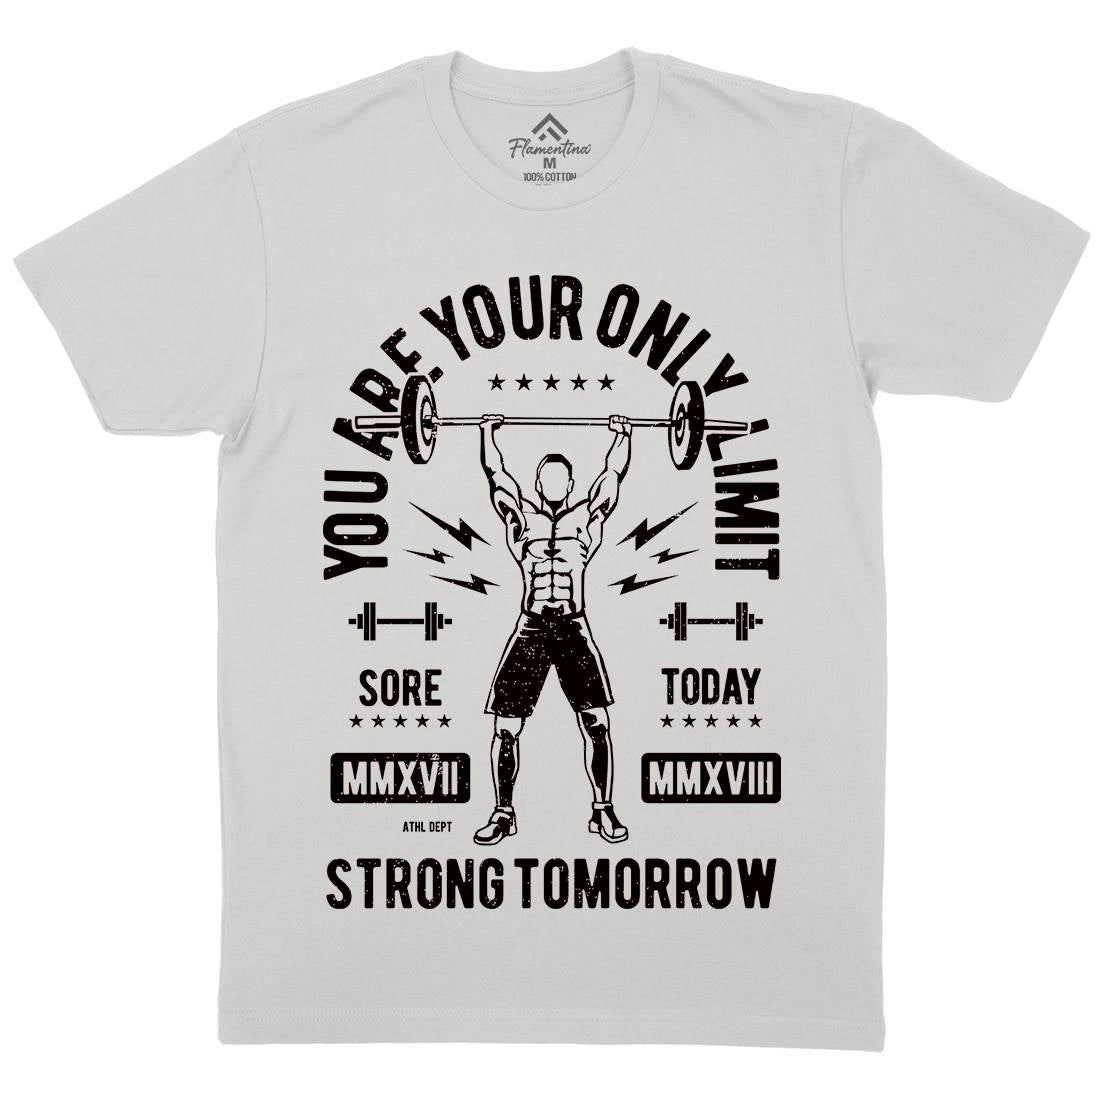 You Are Your Only Limit Mens Crew Neck T-Shirt Gym A799